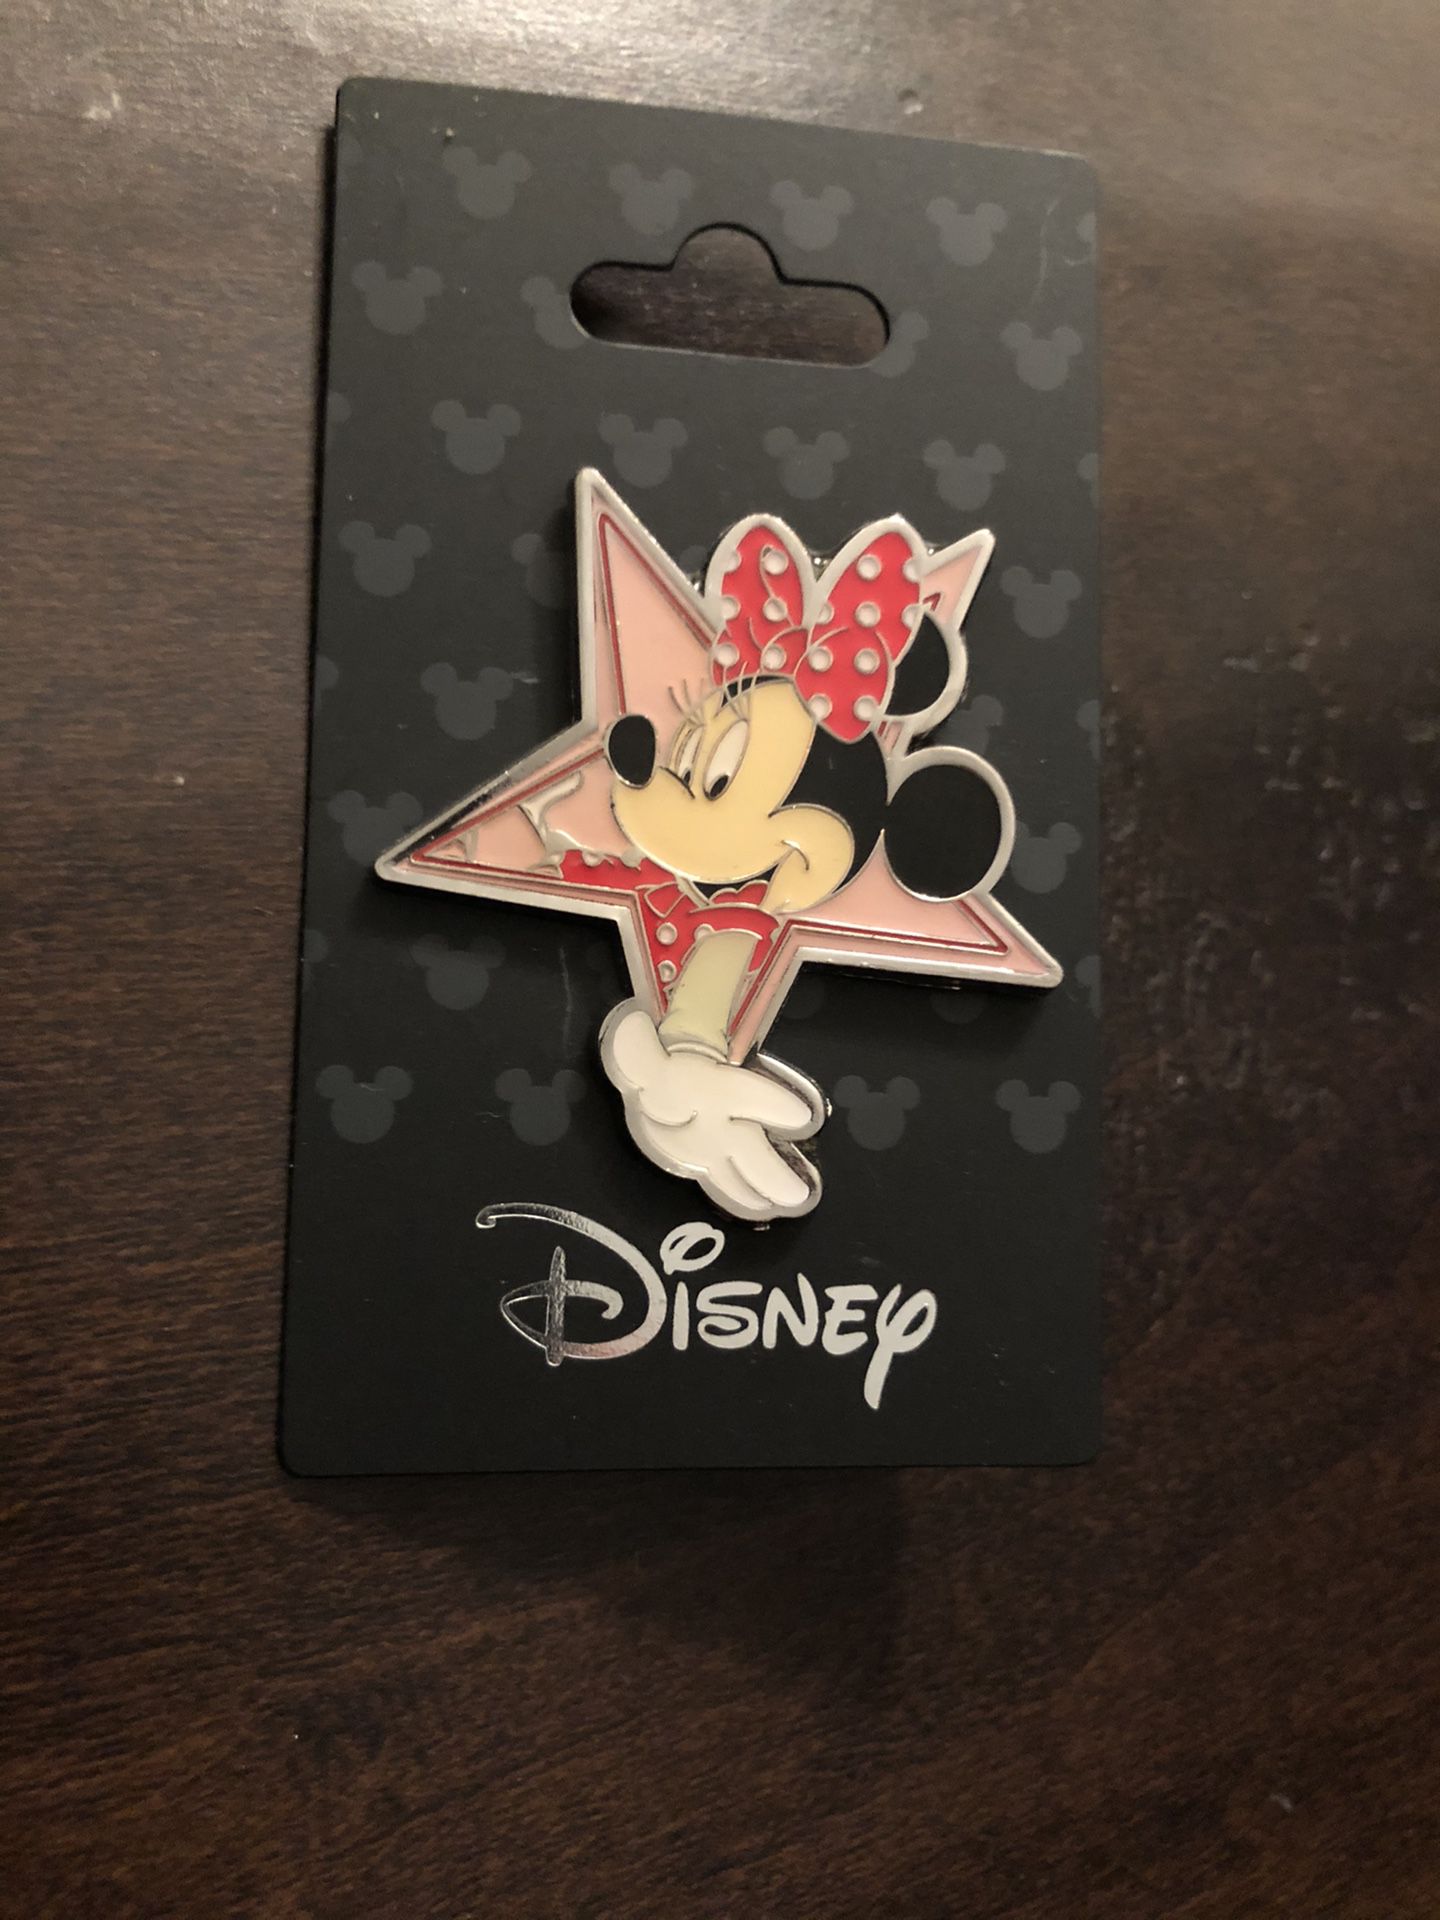 Disney Pin, Minnie Mouse (Glamour Shot) Pink Super Star!